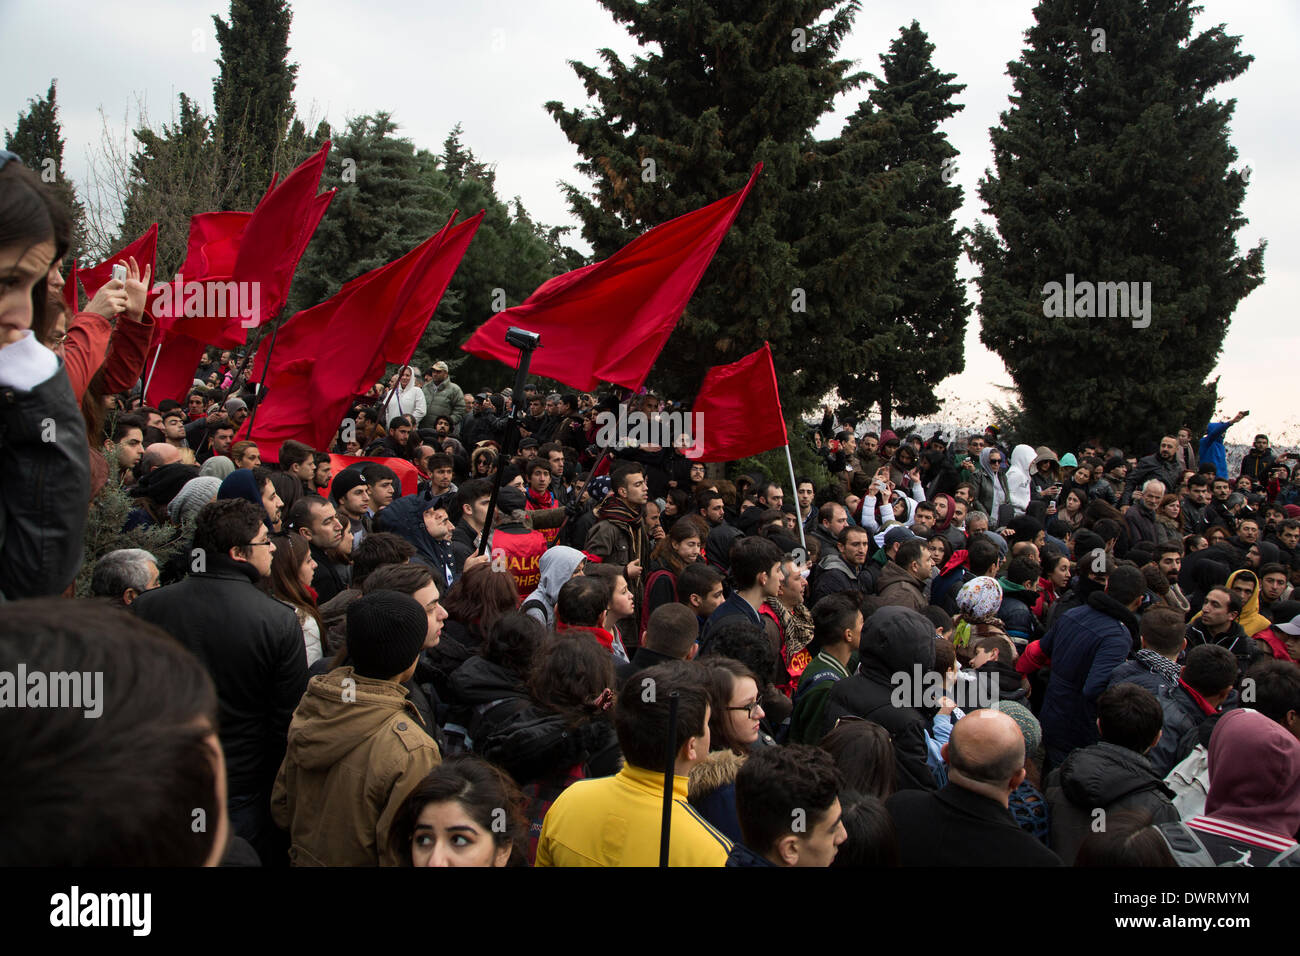 Kadikoy, Istanbul. 12 March 2014. Berkin Elvan, a 15 year old boy hit by a tear gas canister during Gezi Park protests, was celebrated with a burial ceremony where thousands of people from all walks of life attended. Photo by Bikem Ekberzade/Alamy Live News Stock Photo